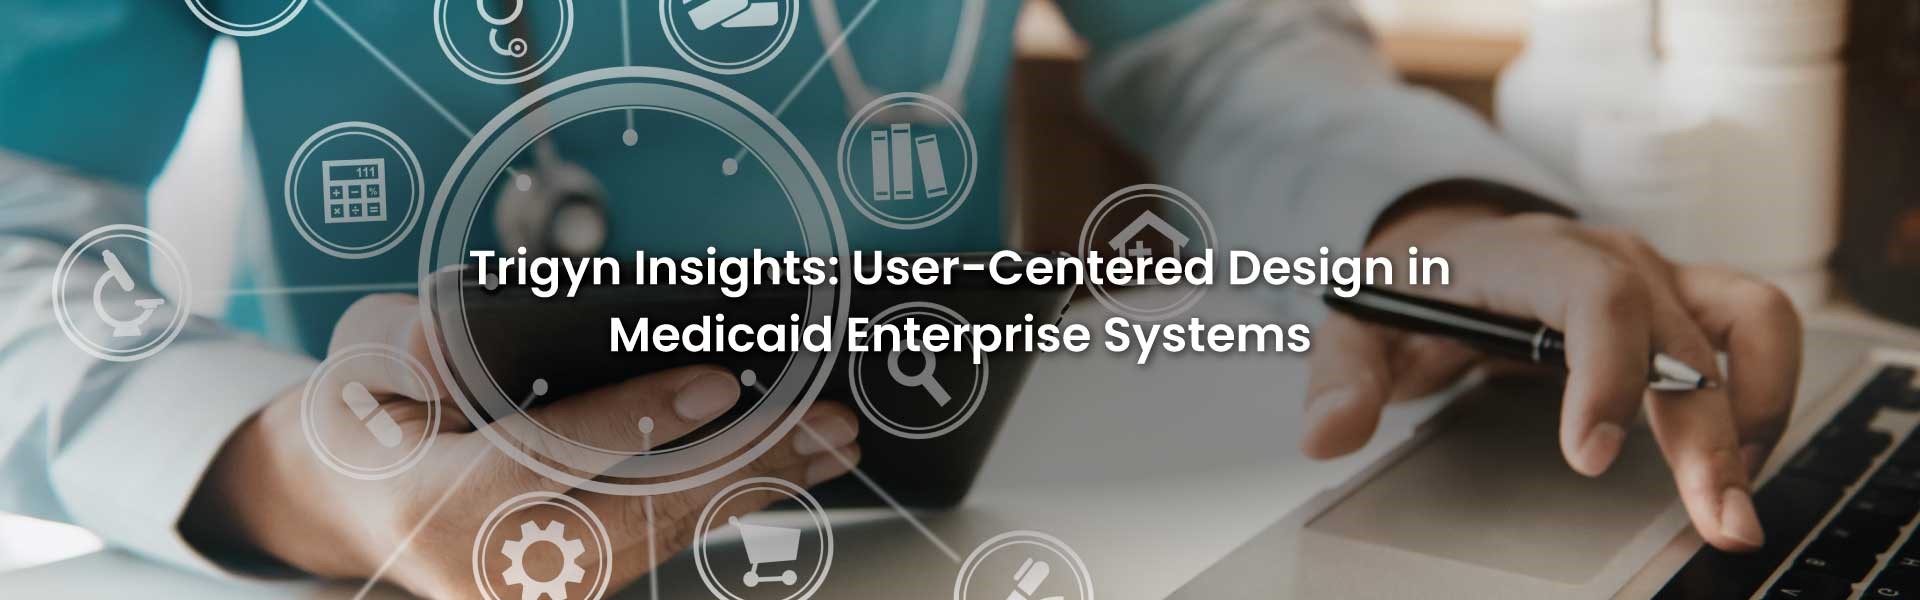 UX in Medicaid Enterprise Systems